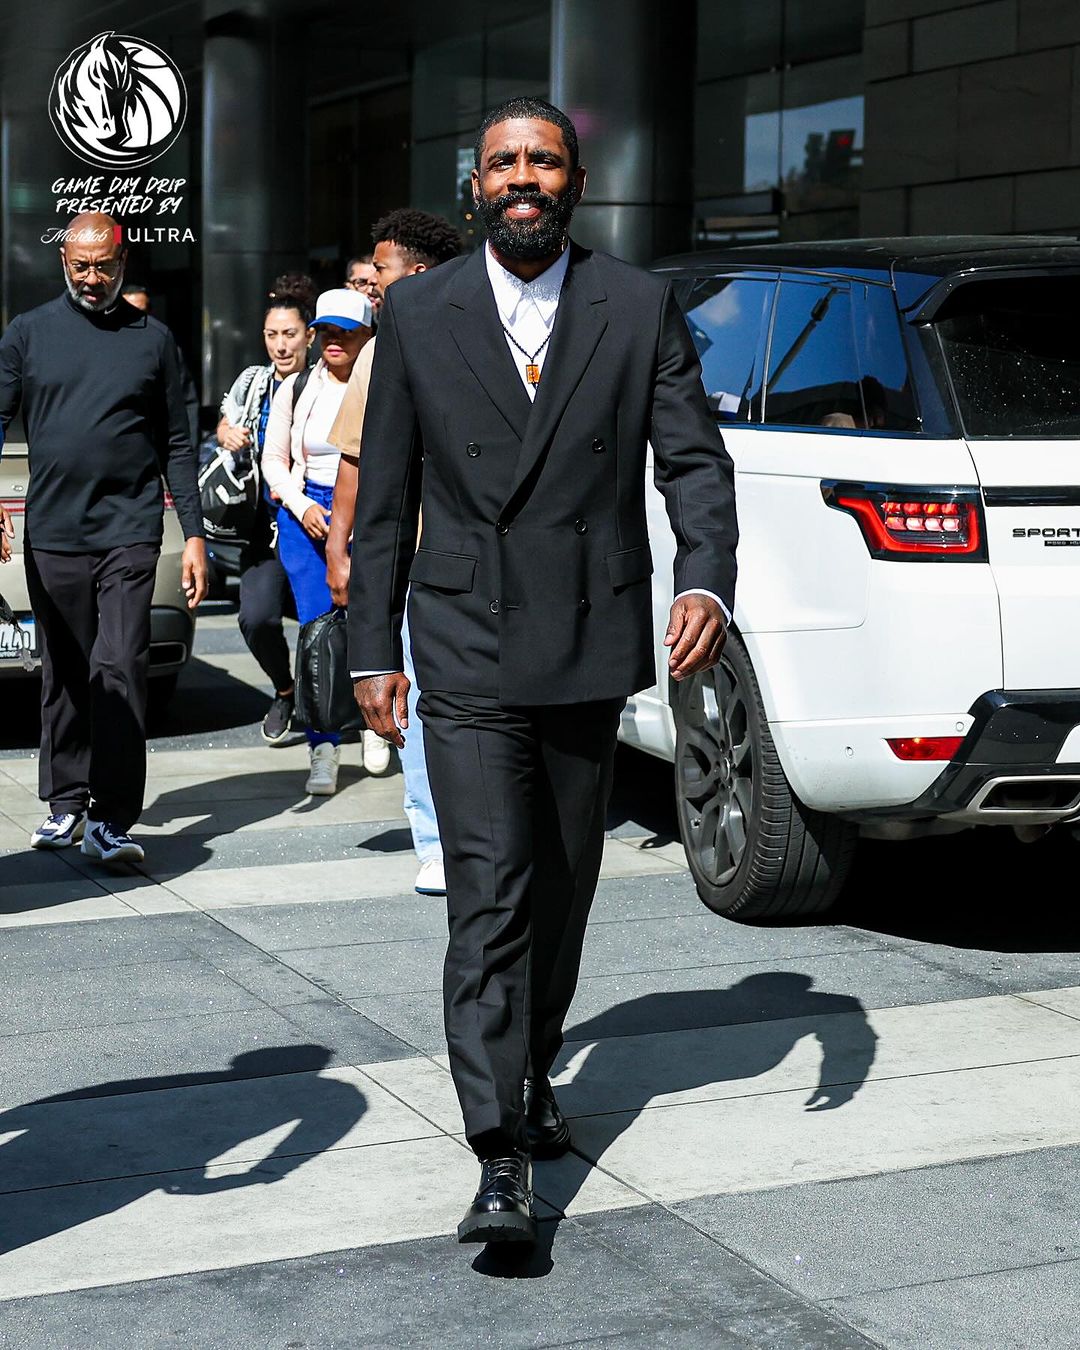 Kyrie irving playoffs suit game 1 vs clippers